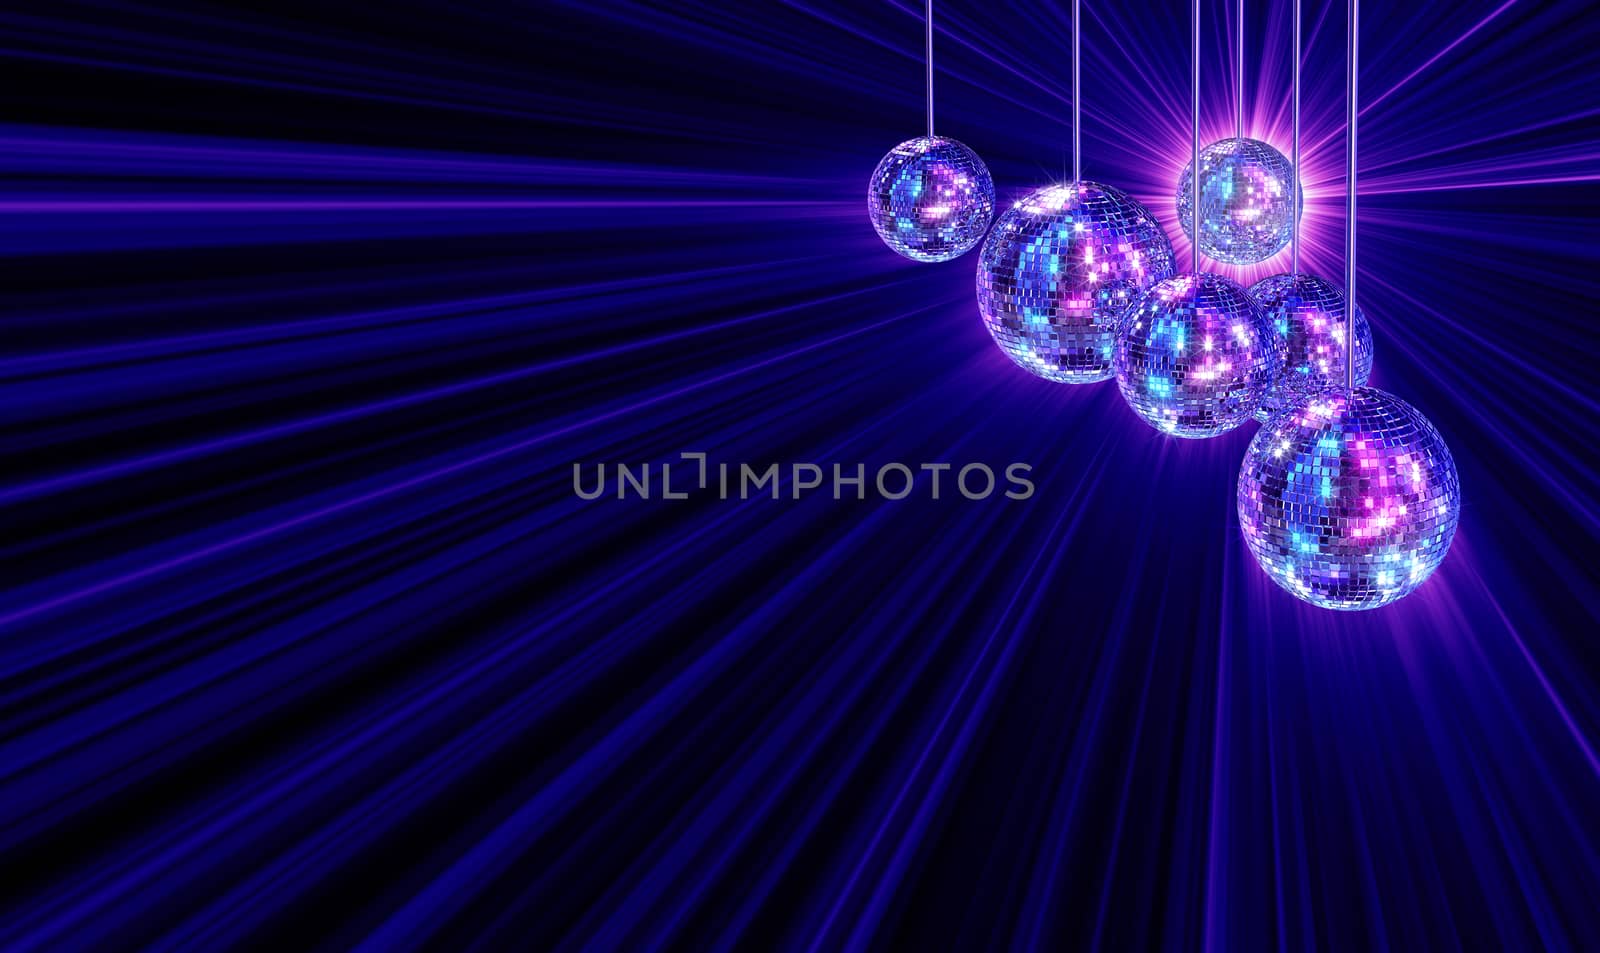 Colorful funky background with mirrored glitter disco balls for party